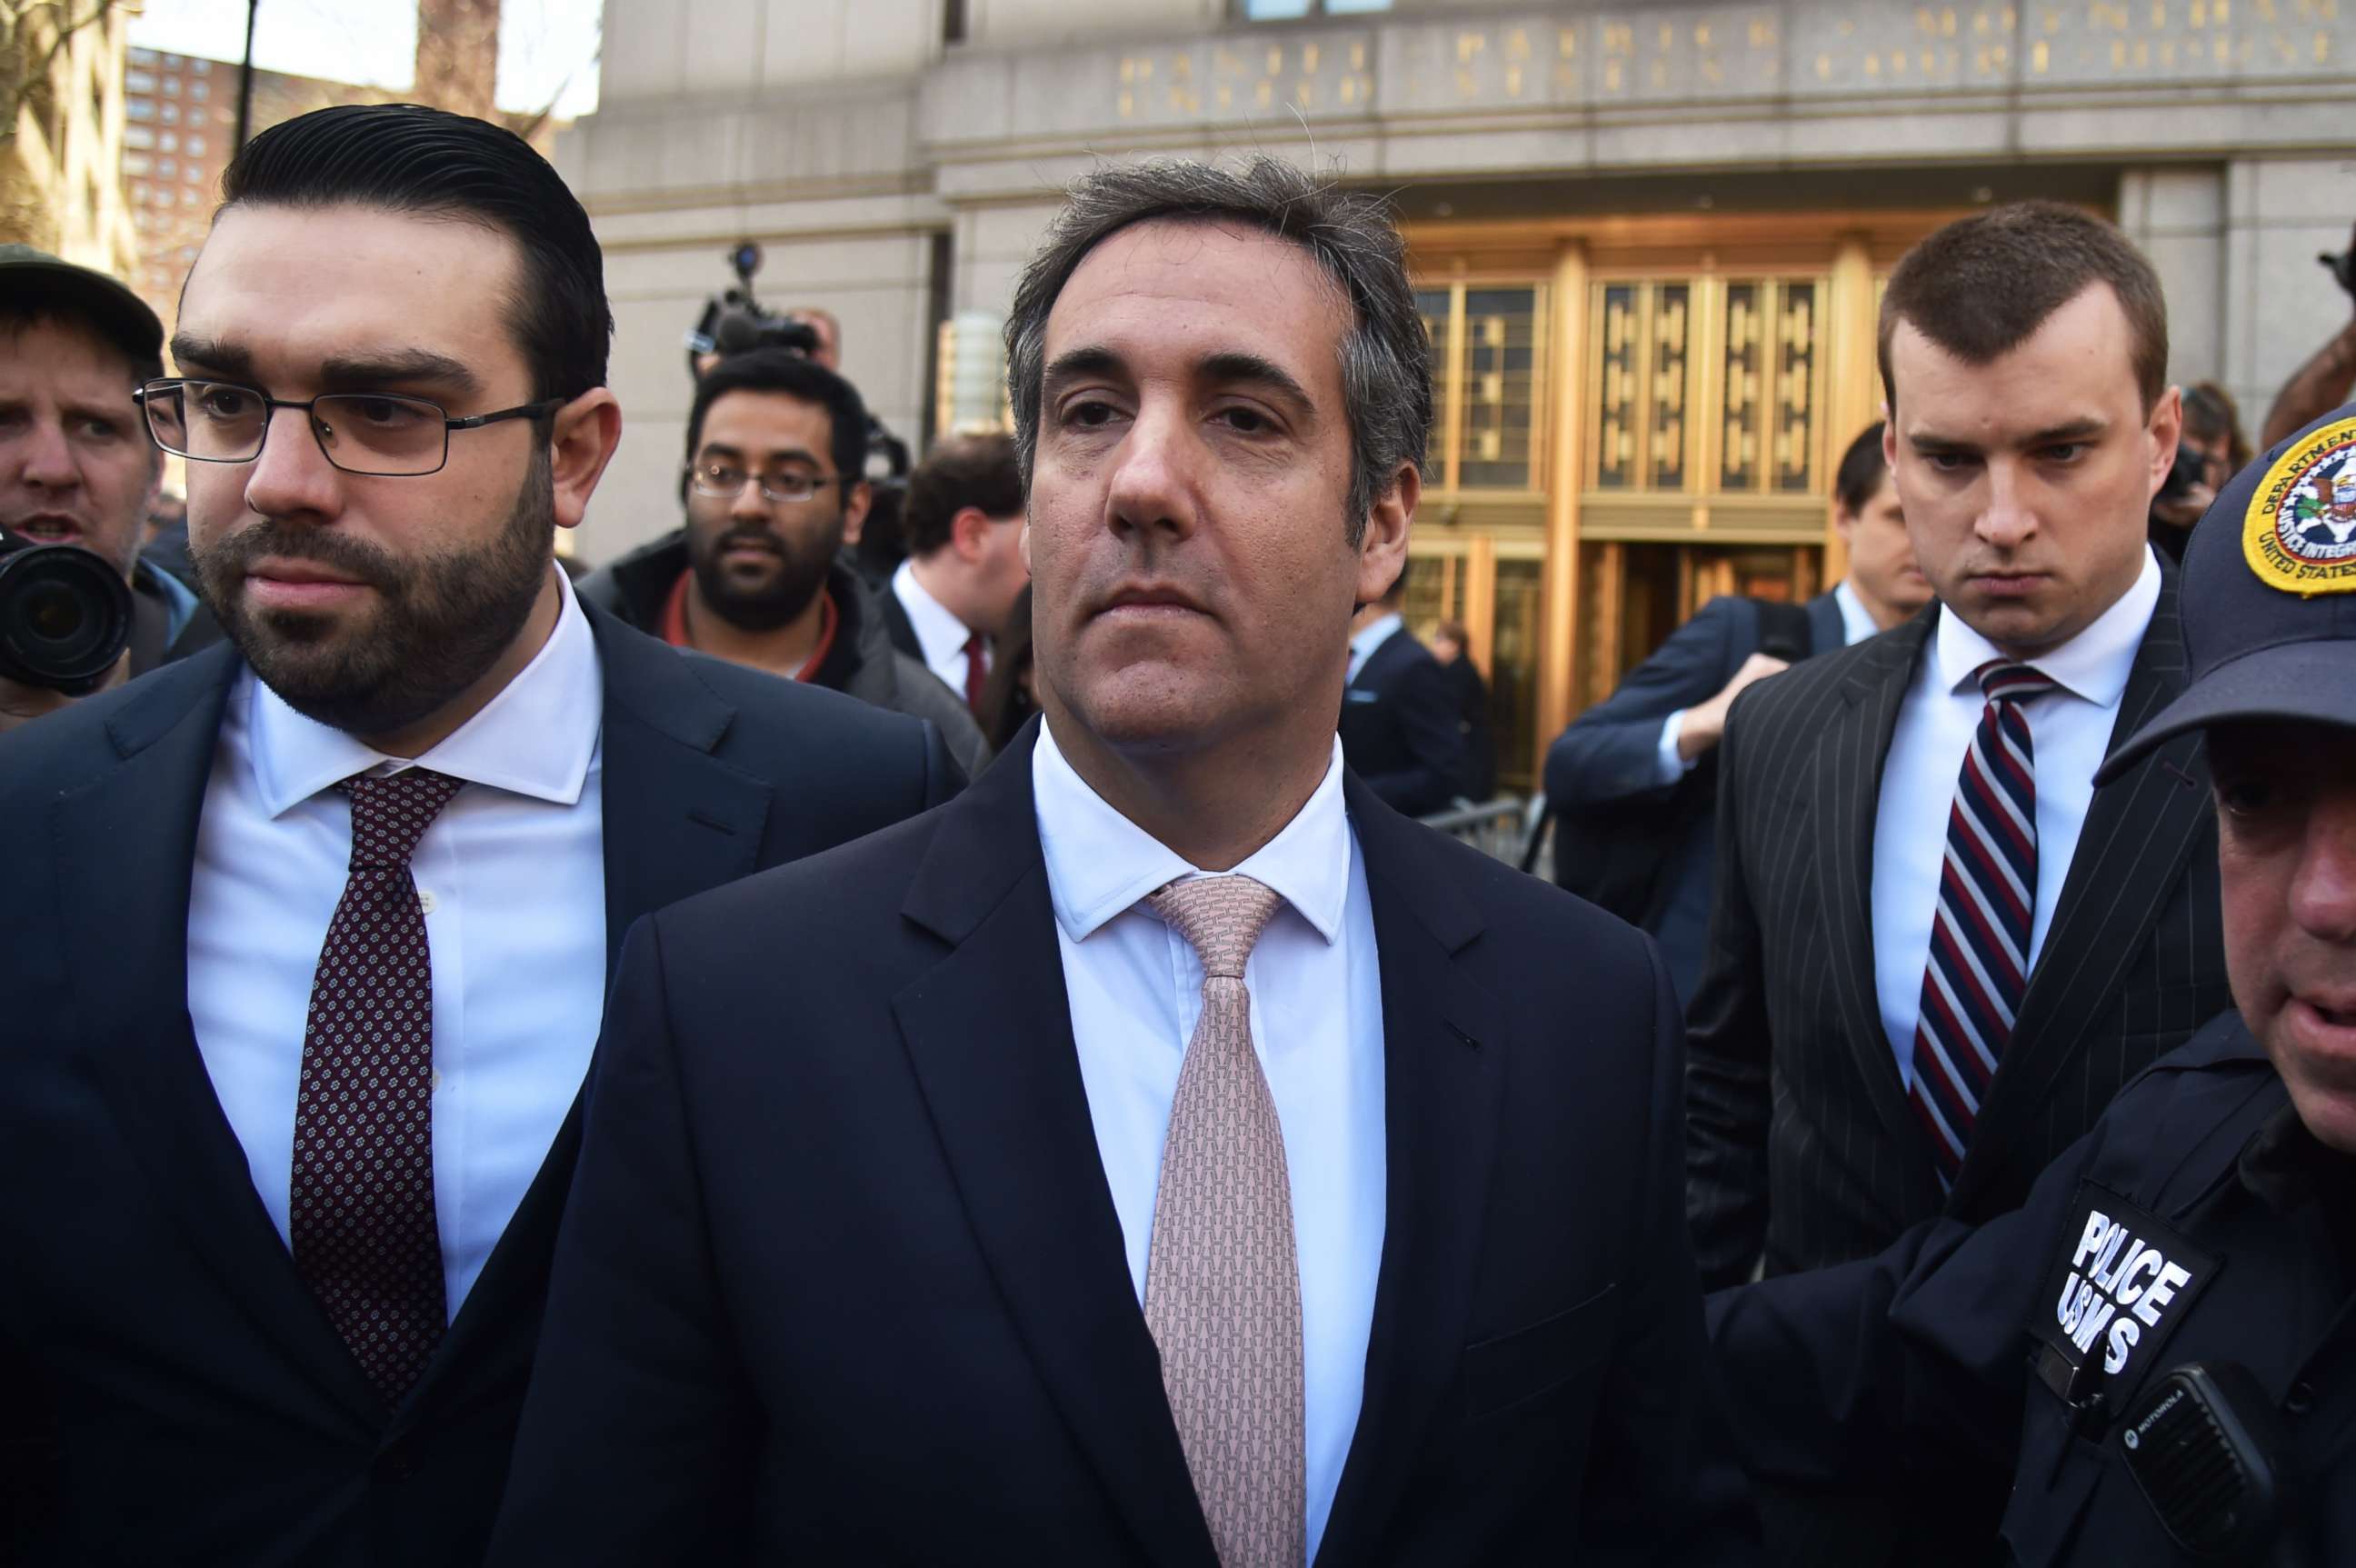 PHOTO: President Donald Trump's personal lawyer Michael Cohen leaves the US Courthouse in New York, April 26, 2018.
